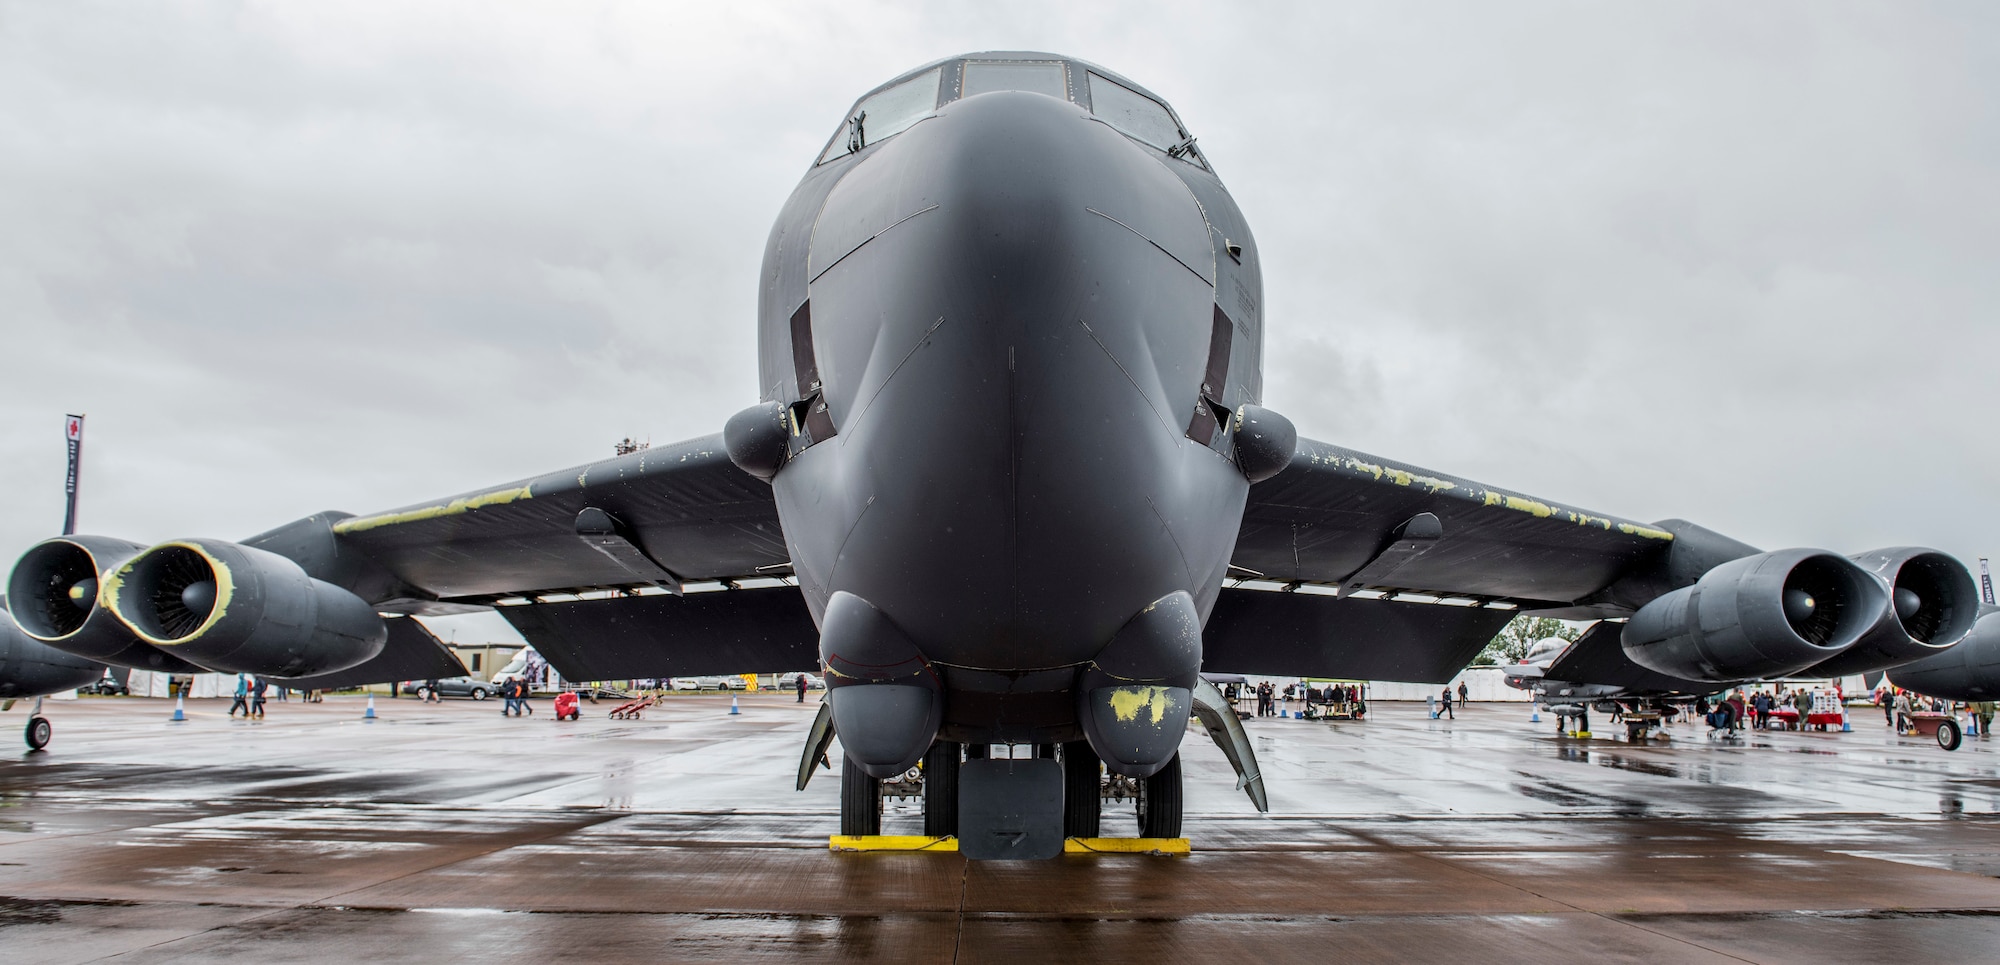 A U.S. Air Force B-52 Stratofortress from Barksdale Air Force Base, Louisiana sits on static display during the 2019 Royal International Air Tattoo at RAF Fairford, England, July 19, 2019. This year's RIAT commemorated the 70th anniversary of NATO and highlighted the United States' enduring commitment to its European allies. (U.S. Air Force photo by Airman 1st Class Jennifer Zima)